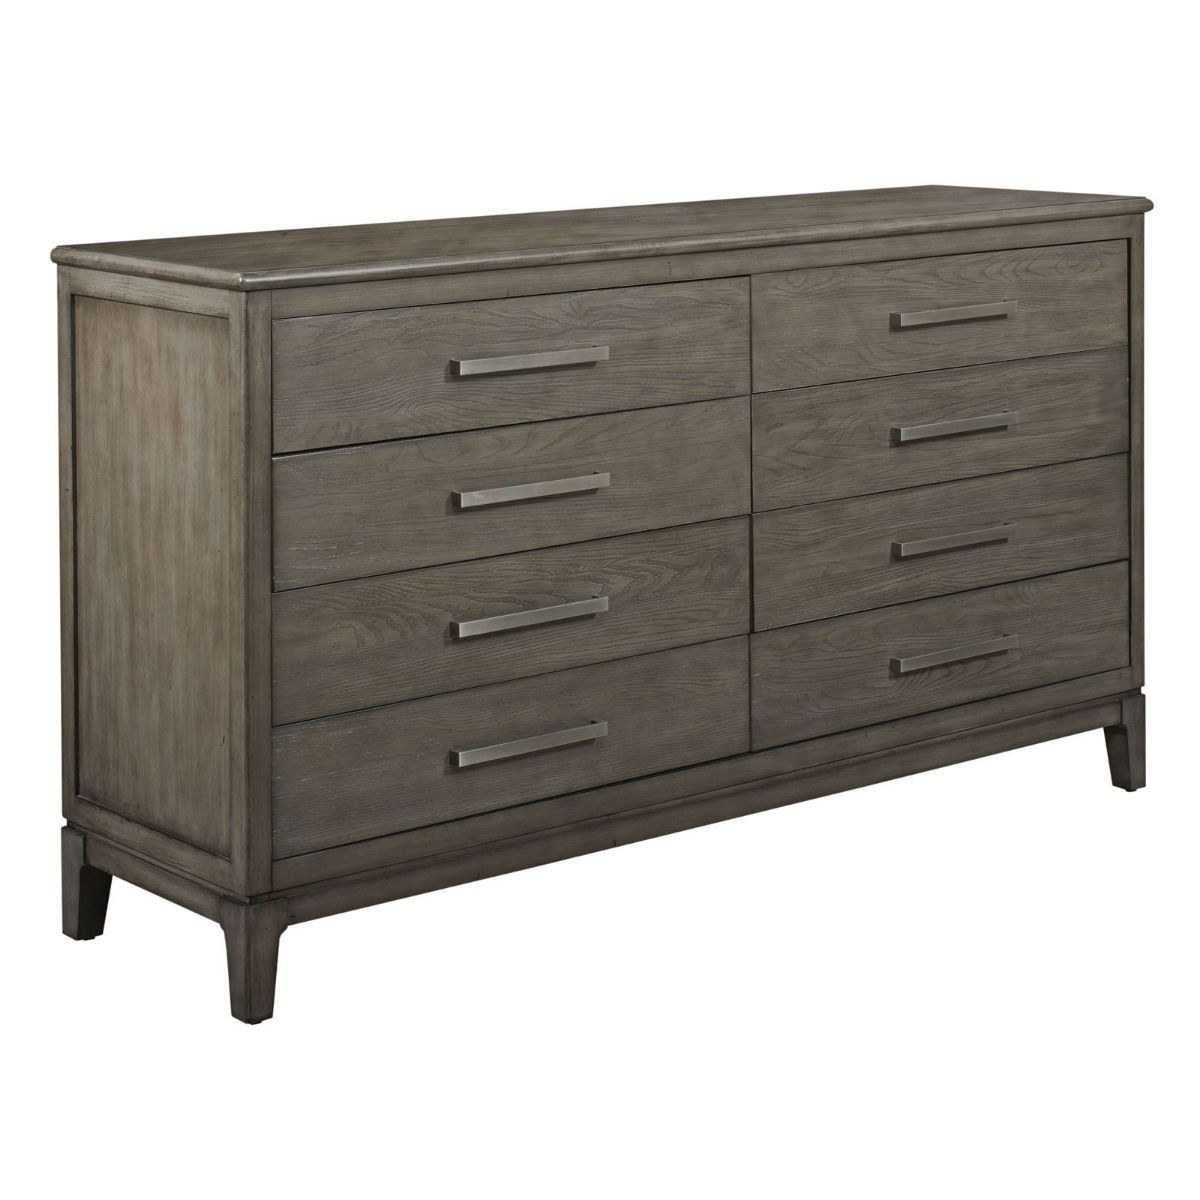 Picture of Cascade 8 Drawer Dresser